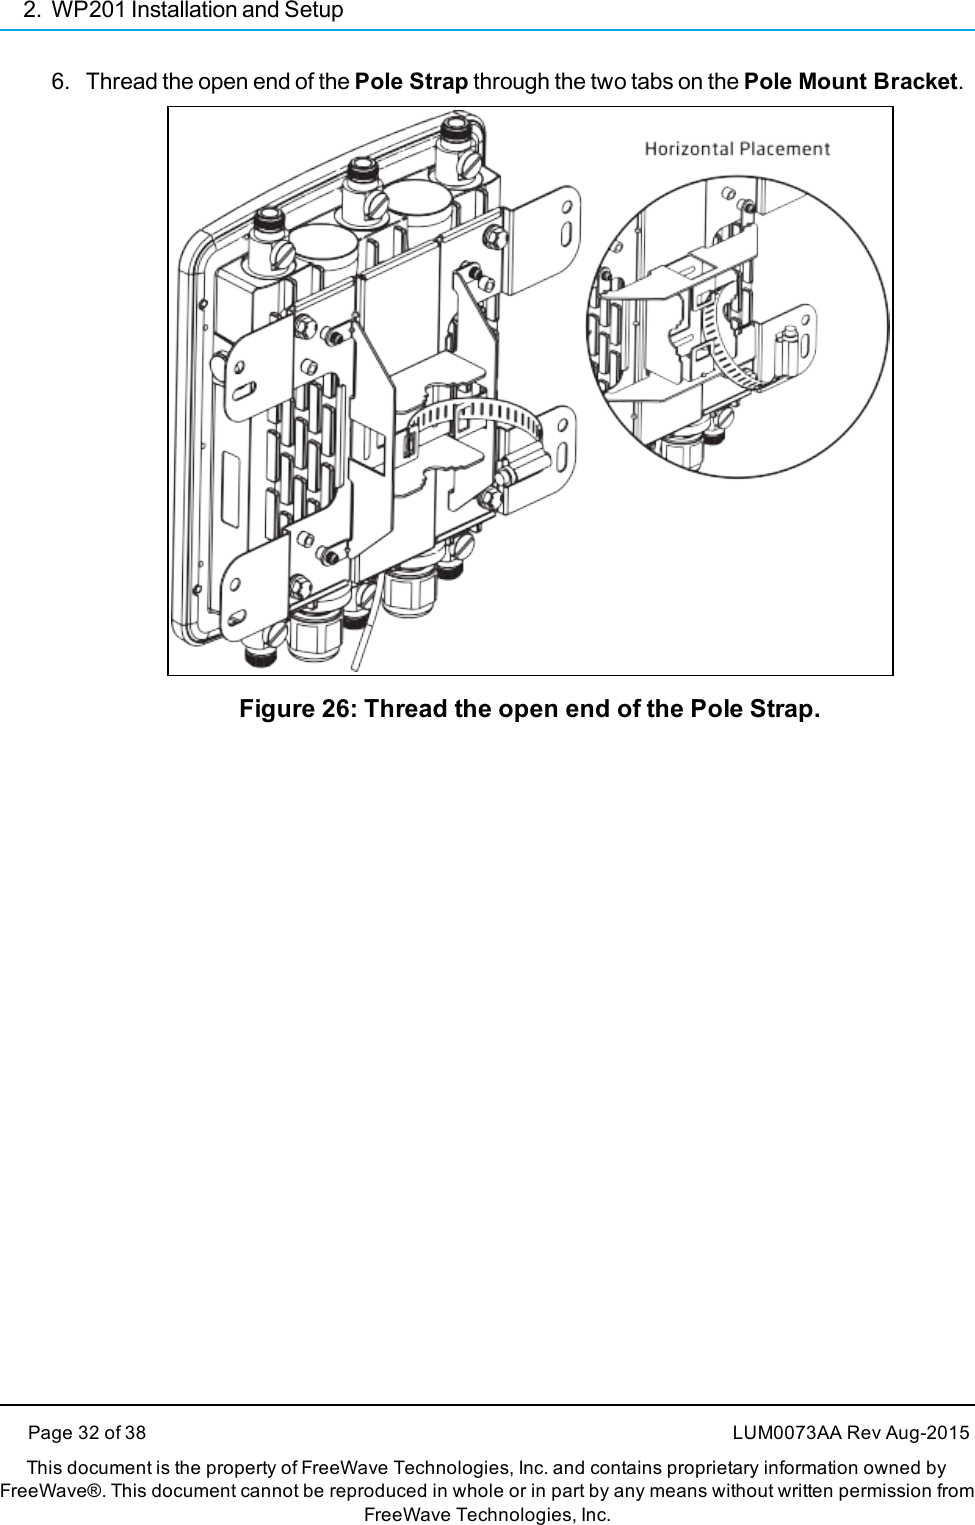 2. WP201 Installation and Setup6. Thread the open end of the Pole Strap through the two tabs on the Pole Mount Bracket.Figure 26: Thread the open end of the Pole Strap.Page 32 of 38 LUM0073AA Rev Aug-2015This document is the property of FreeWave Technologies, Inc. and contains proprietary information owned byFreeWave®. This document cannot be reproduced in whole or in part by any means without written permission fromFreeWave Technologies, Inc.